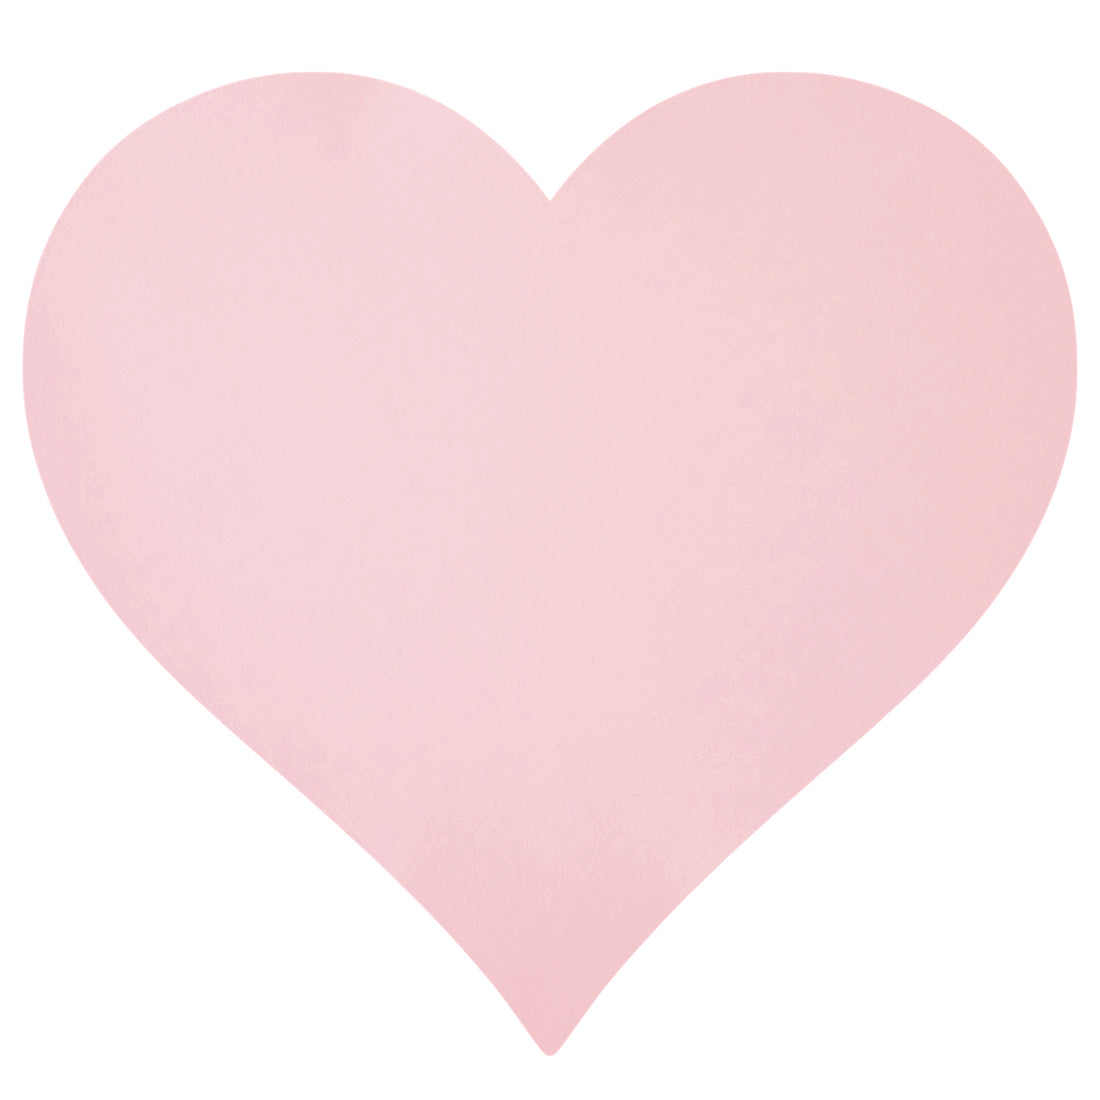 A die-cut paper heart placemat in solid light pink.